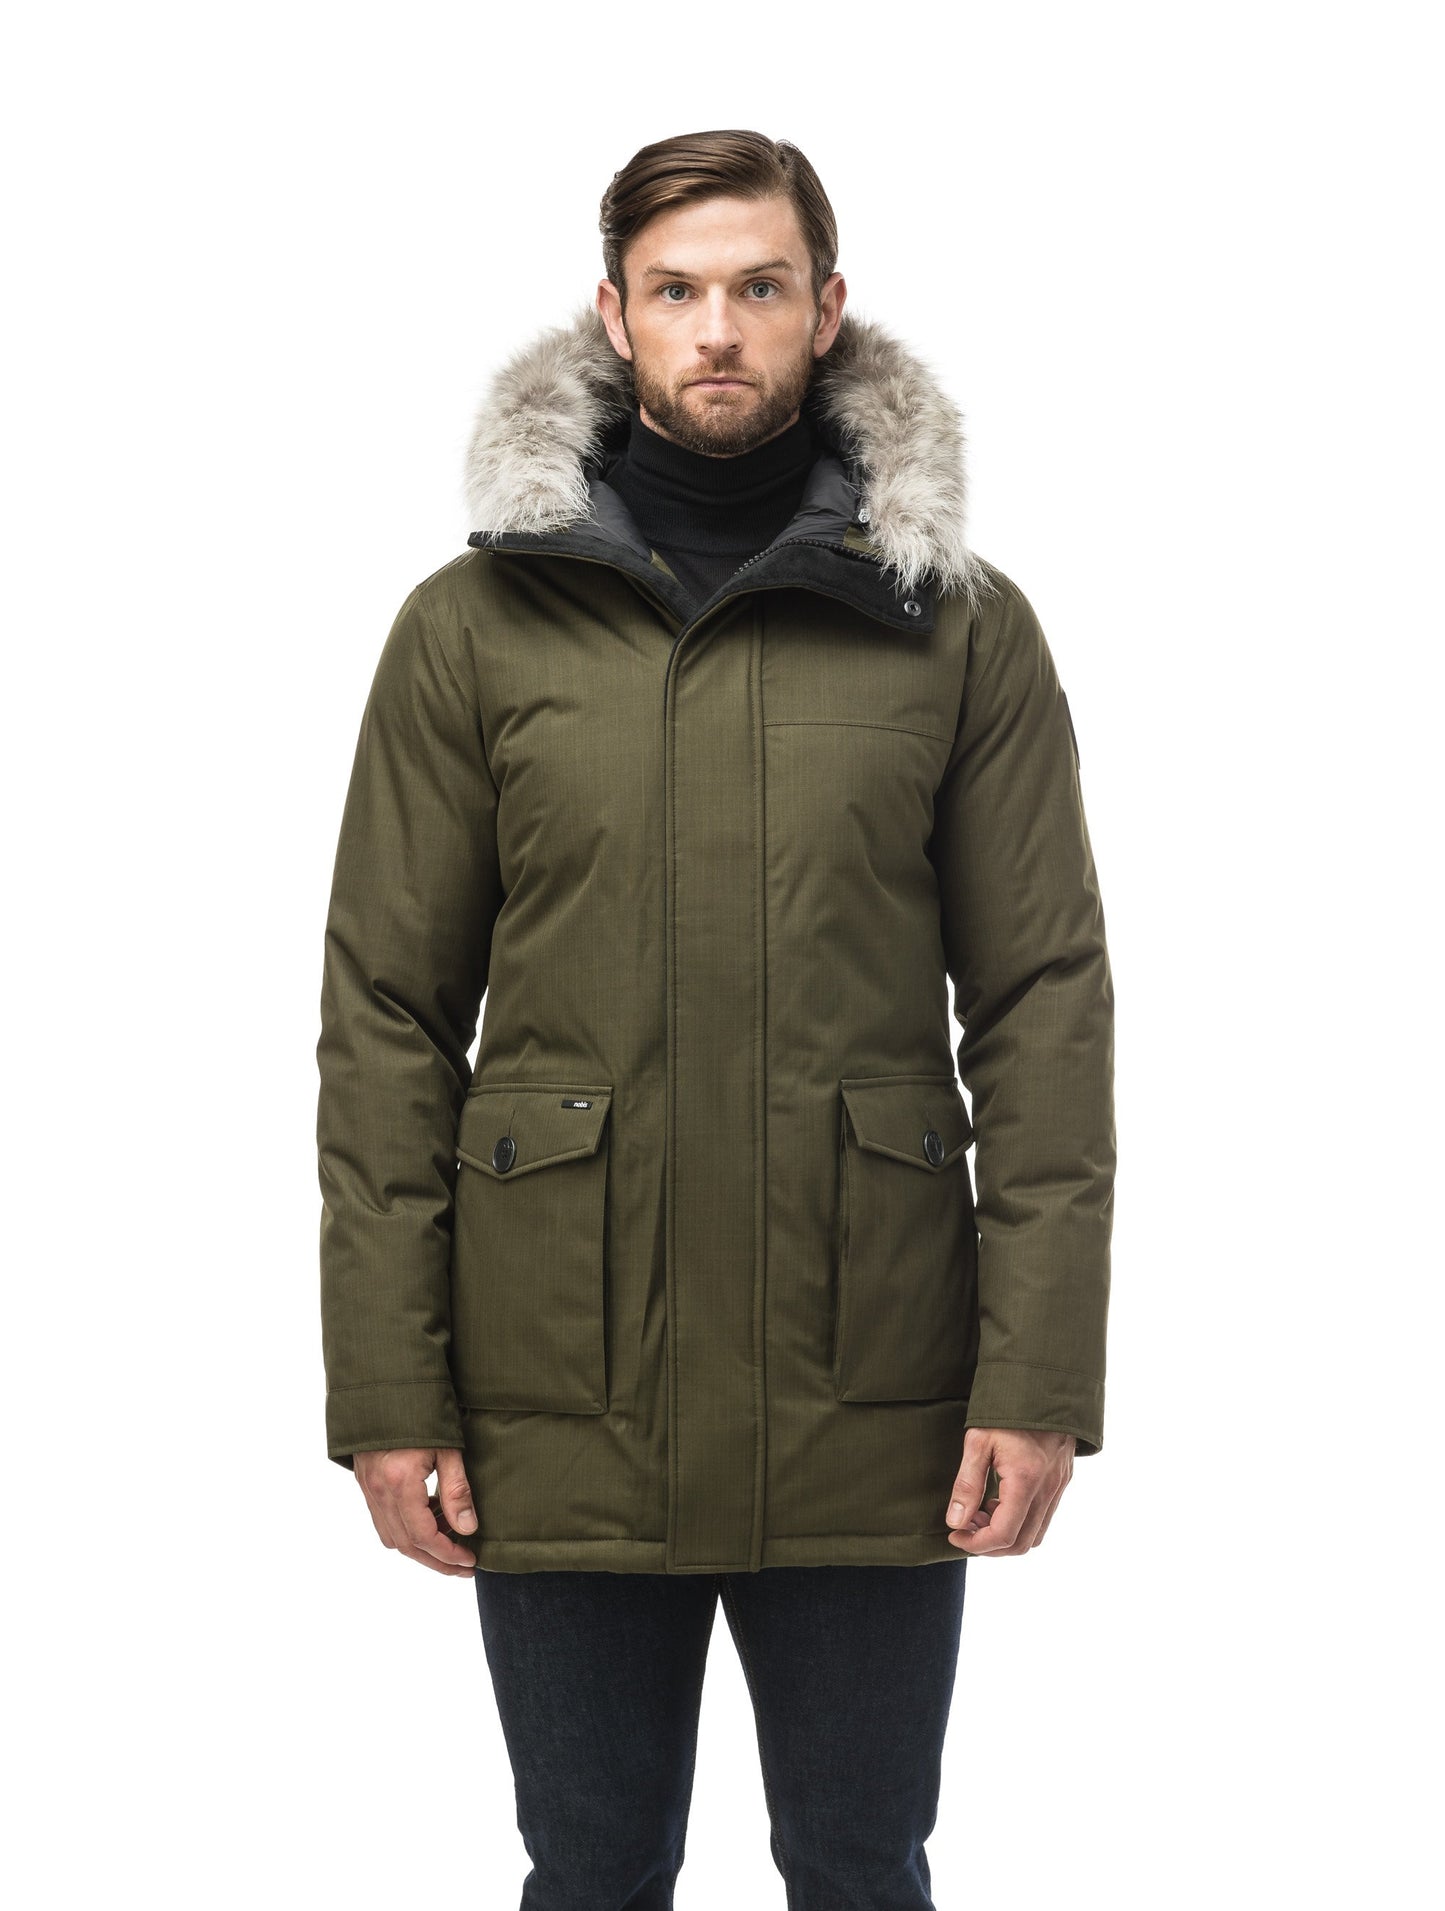 Men's slim fitting waist length parka with removable fur trim on the hood and two waist patch pockets in CH Fatigue